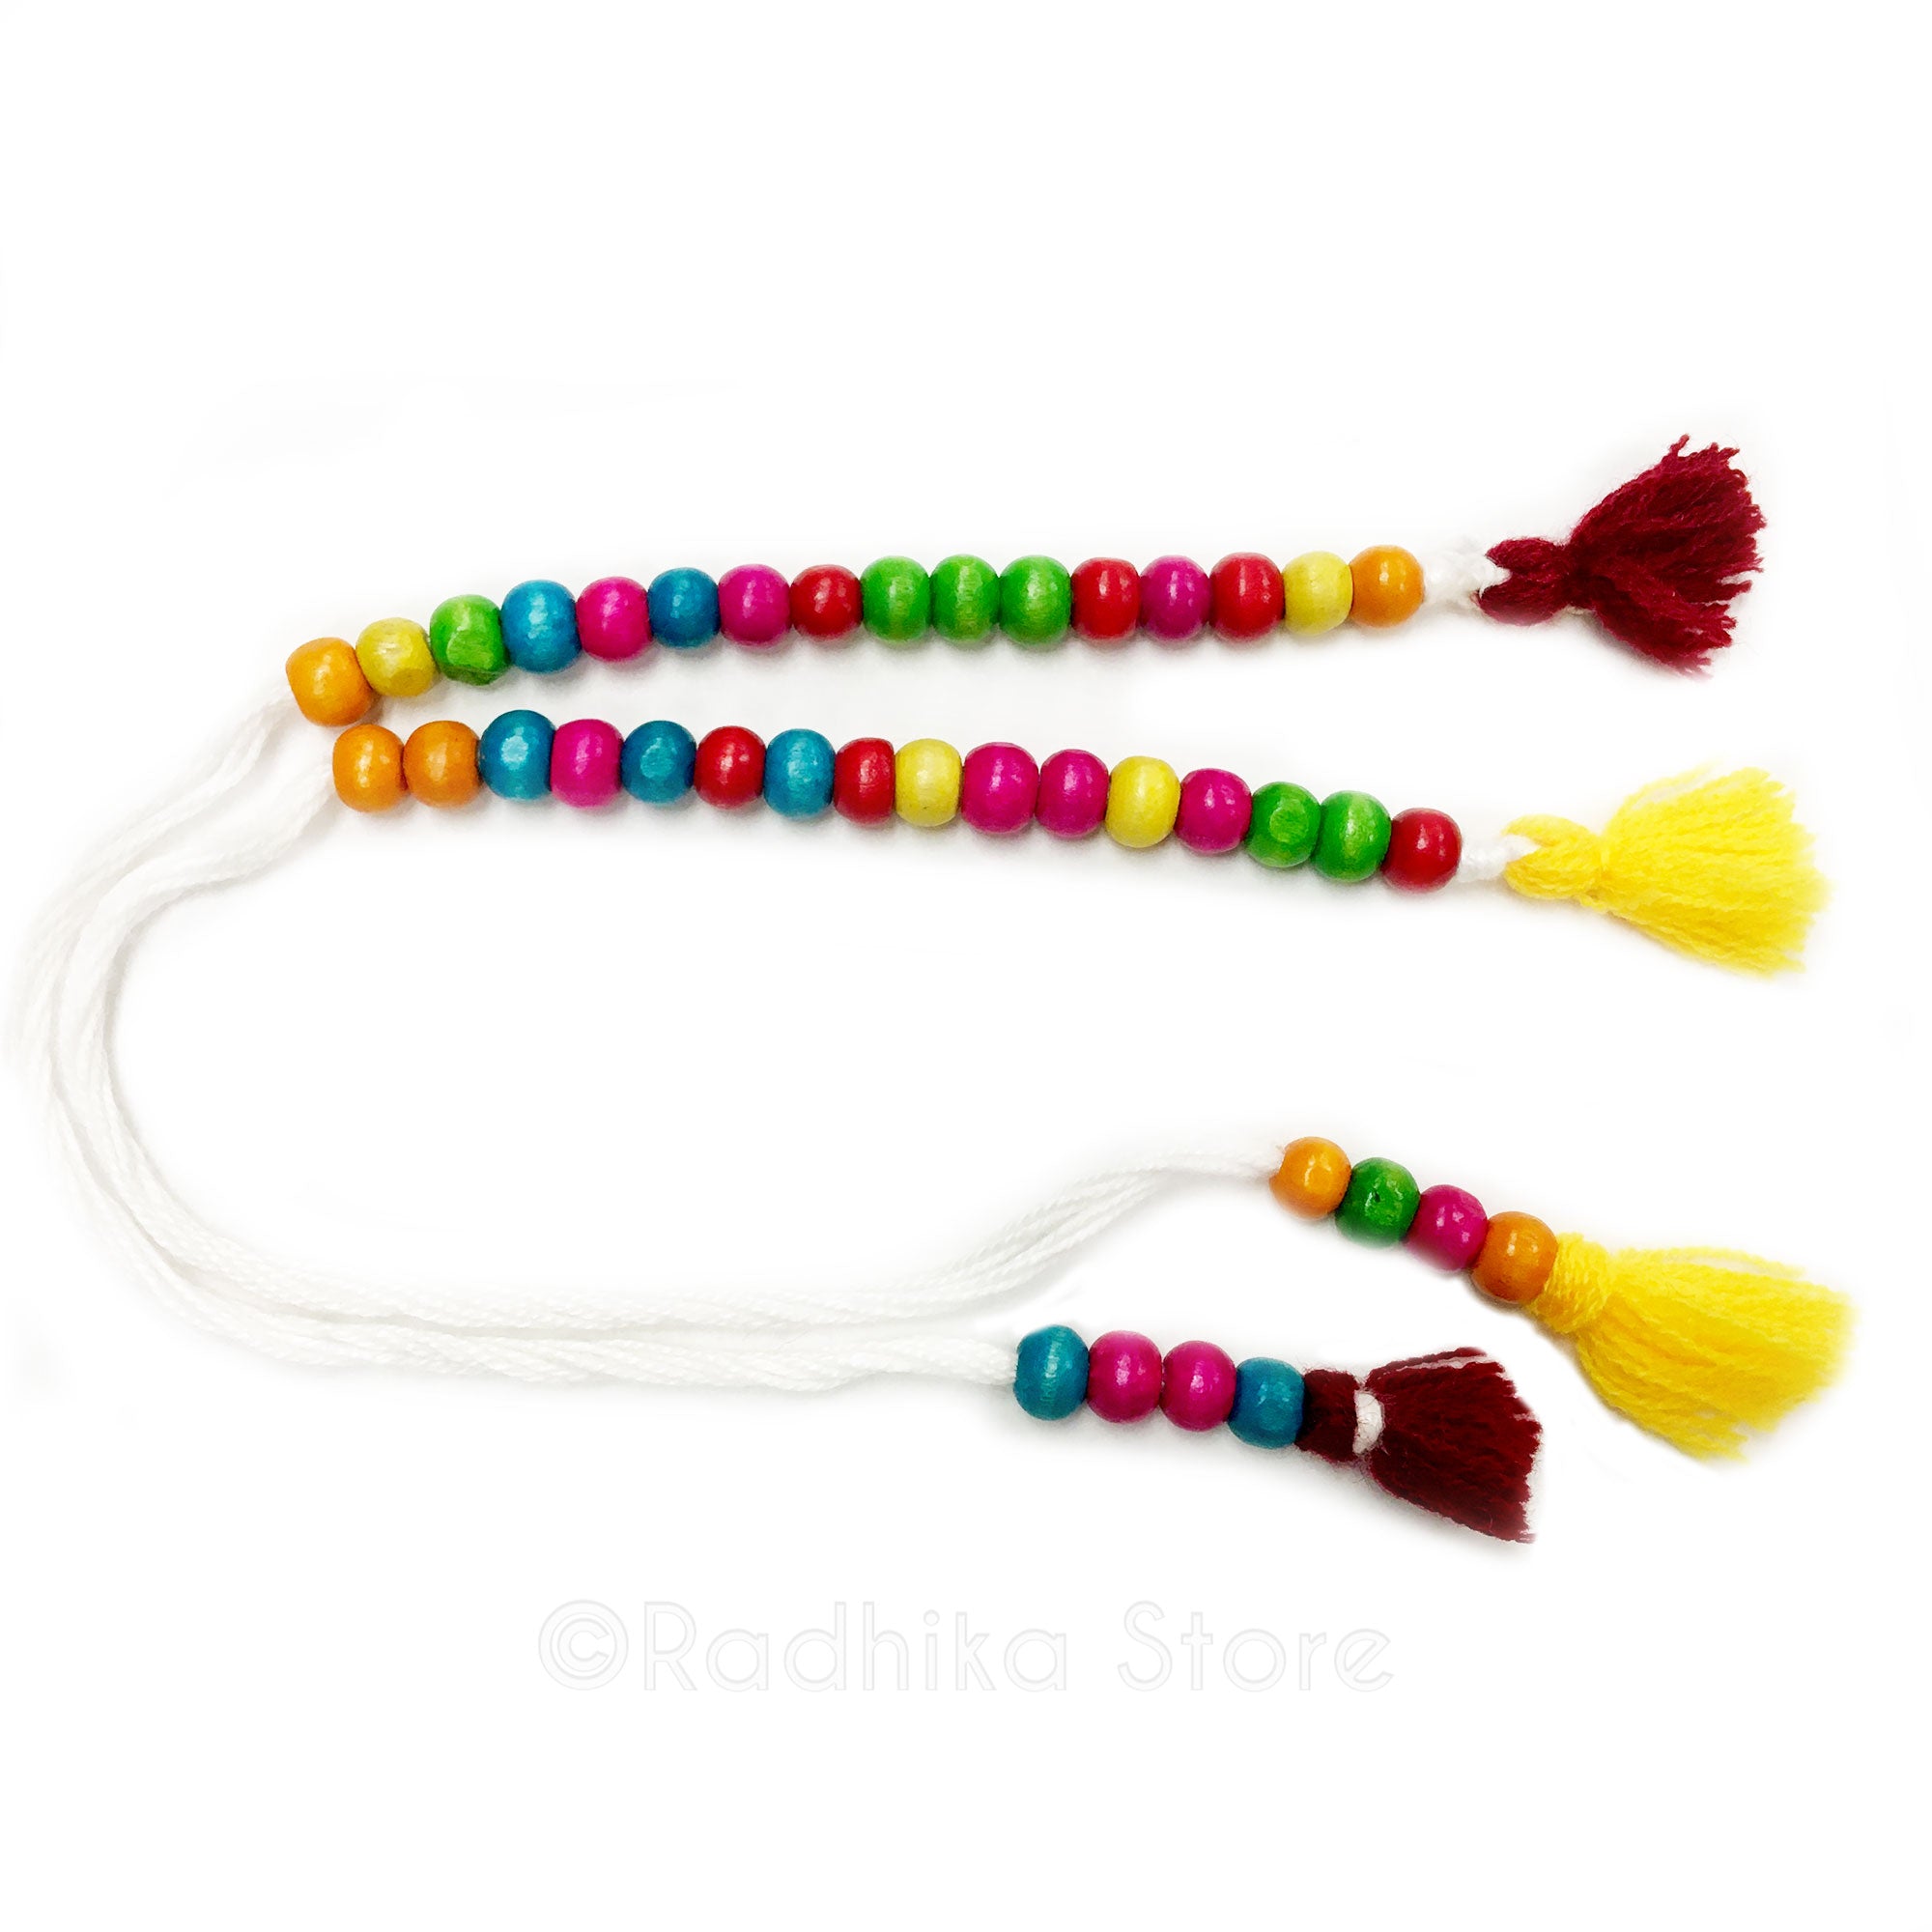 Colorful Wooden Japa Counting Beads